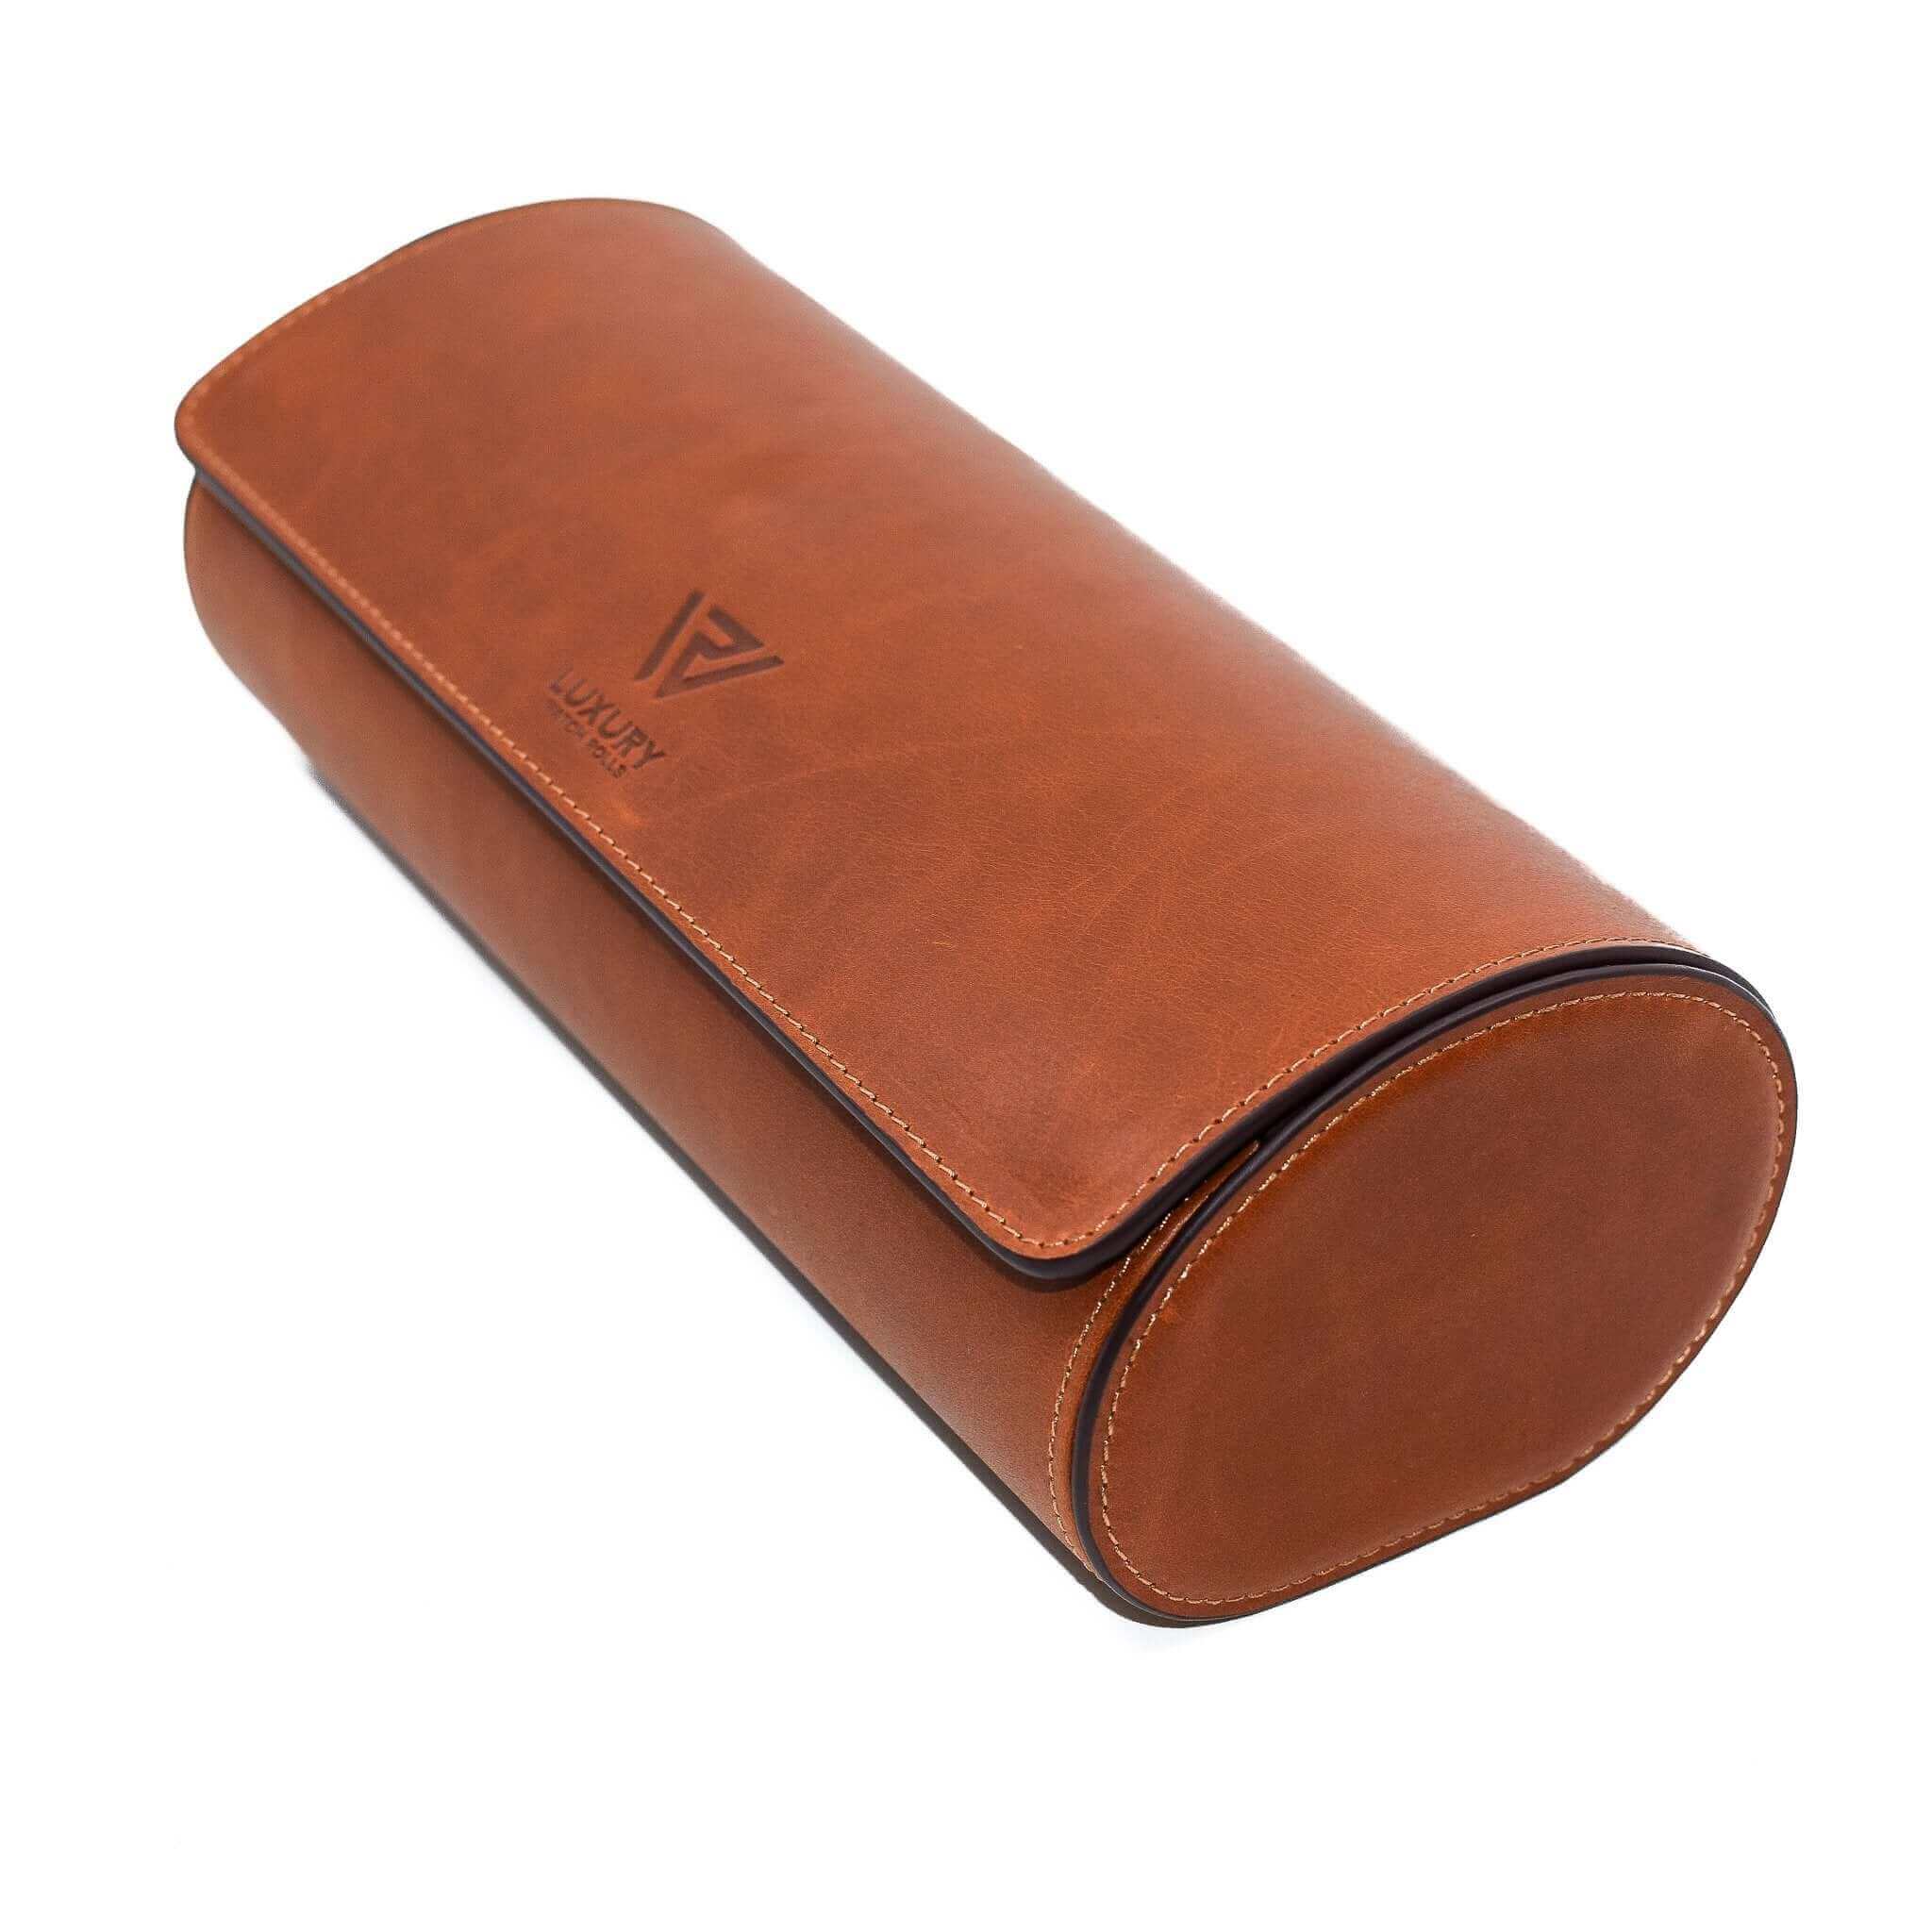 A side view of Luxury Watch Roll's triple slot, vintage brown leather watch roll for three watch storage.